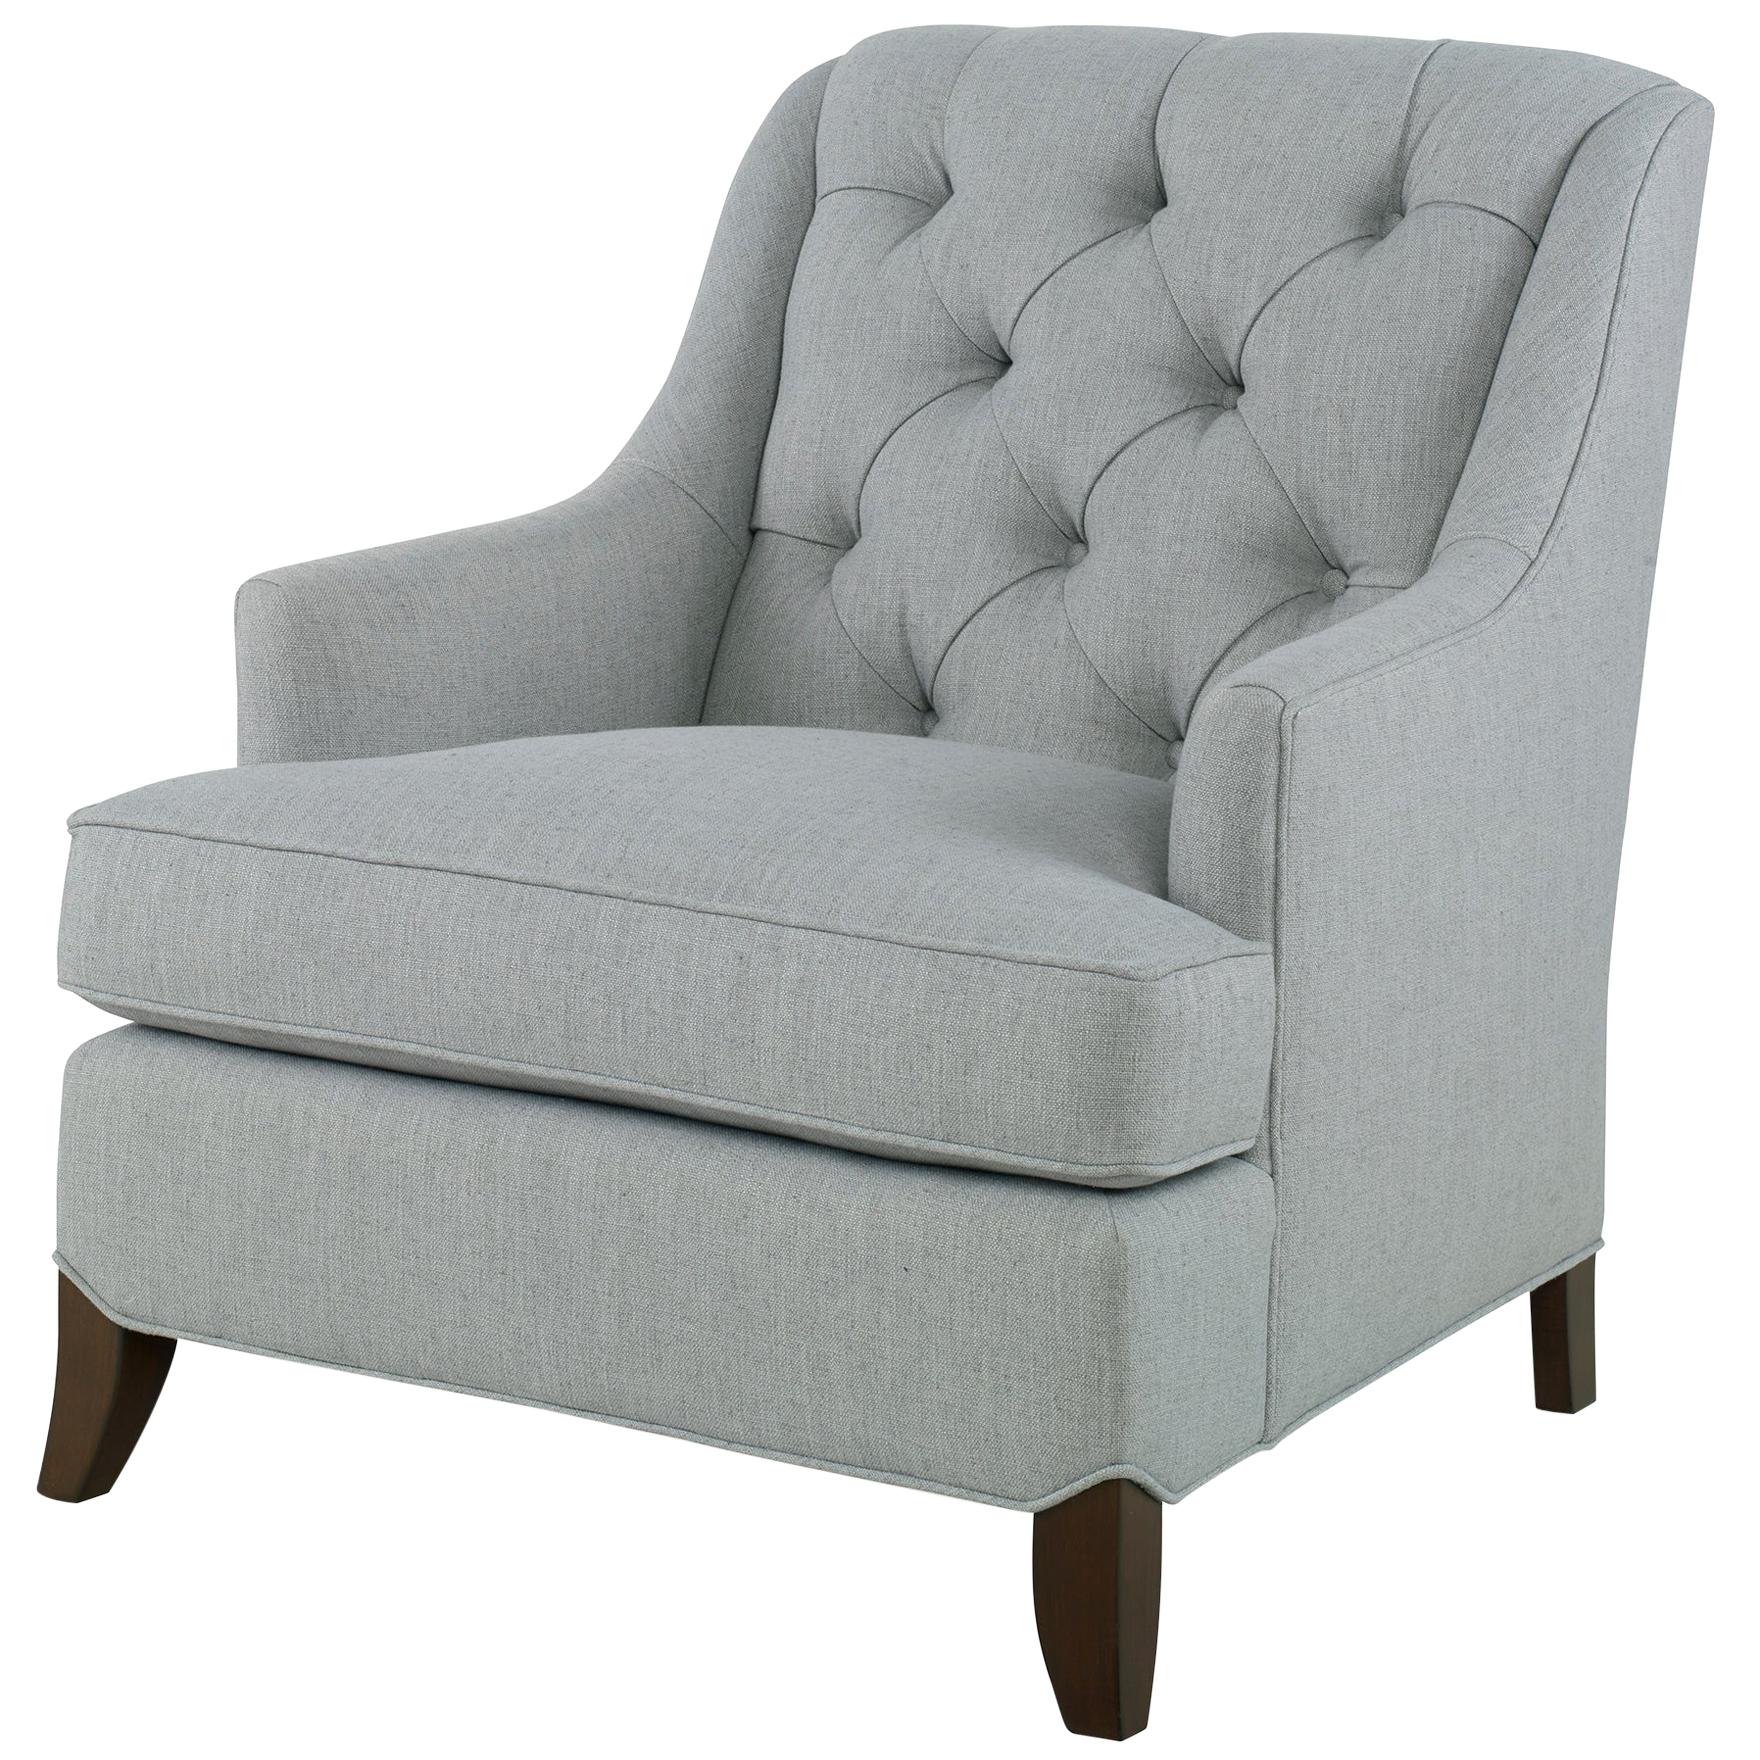 Medley Chair in Gray by CuratedKravet